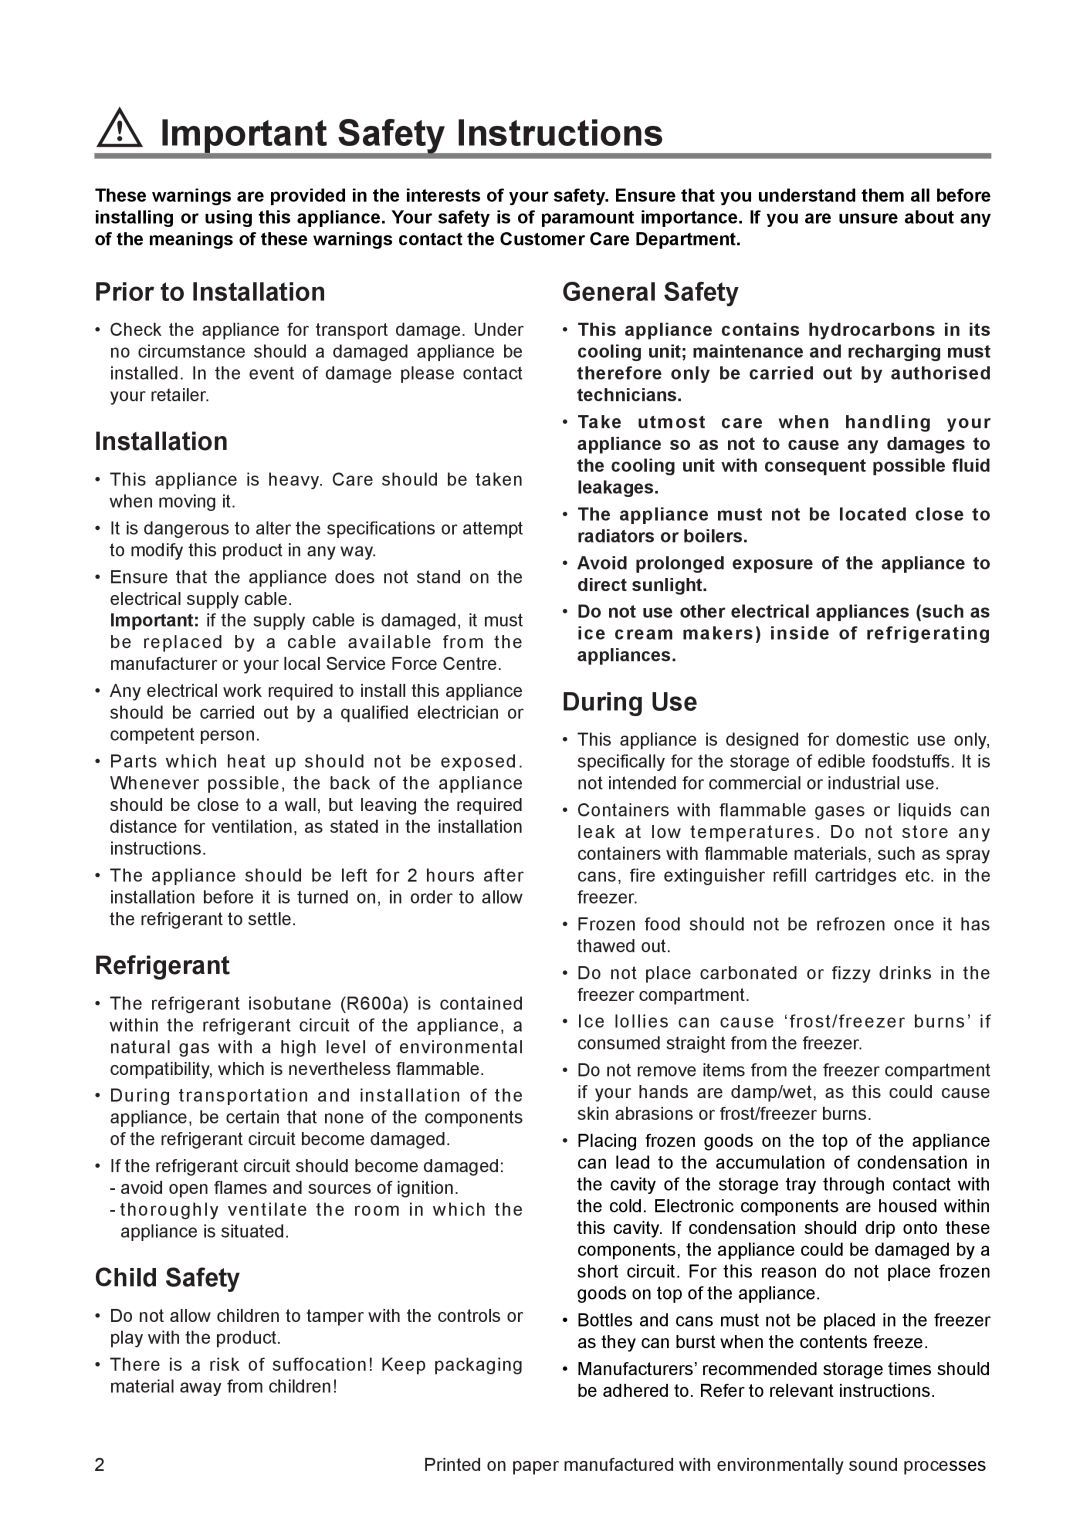 Zanussi ZUF 65 W 1 manual Important Safety Instructions, Prior to Installation, Refrigerant, Child Safety, General Safety 